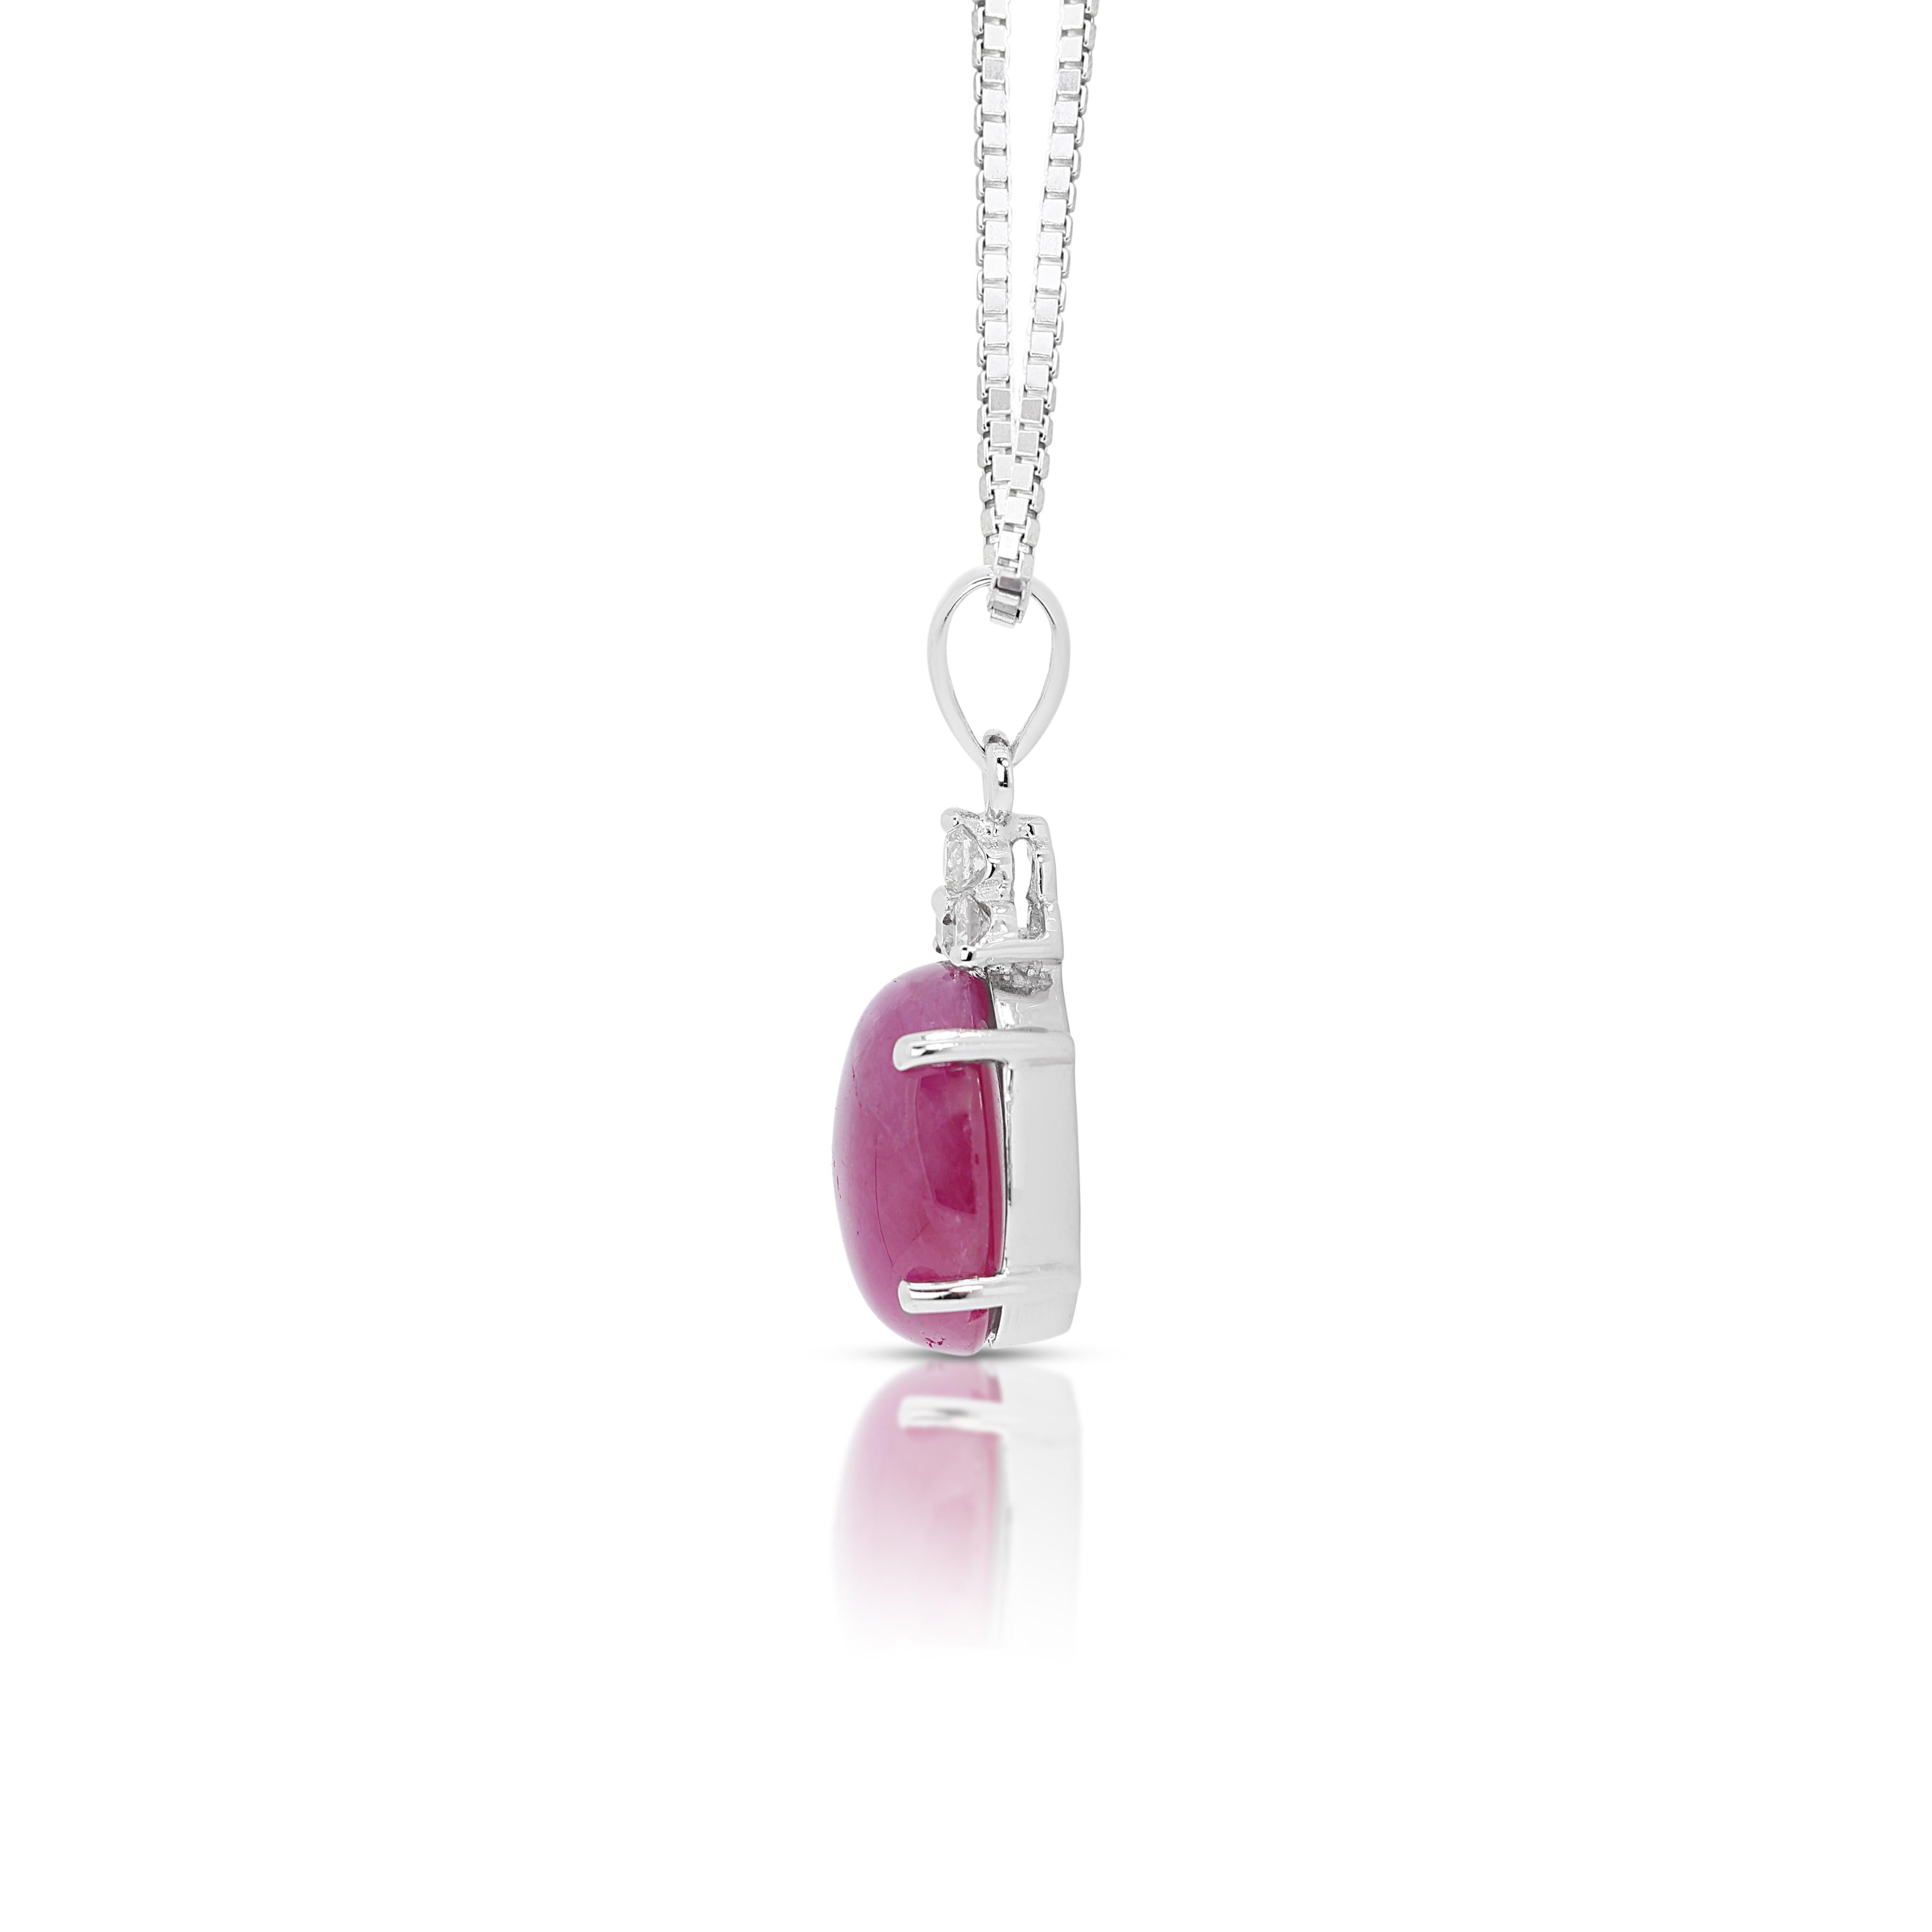 Round Cut Elegant 0.40ct Ruby Pendant with Diamonds in 18K White Gold - Chain Not Included